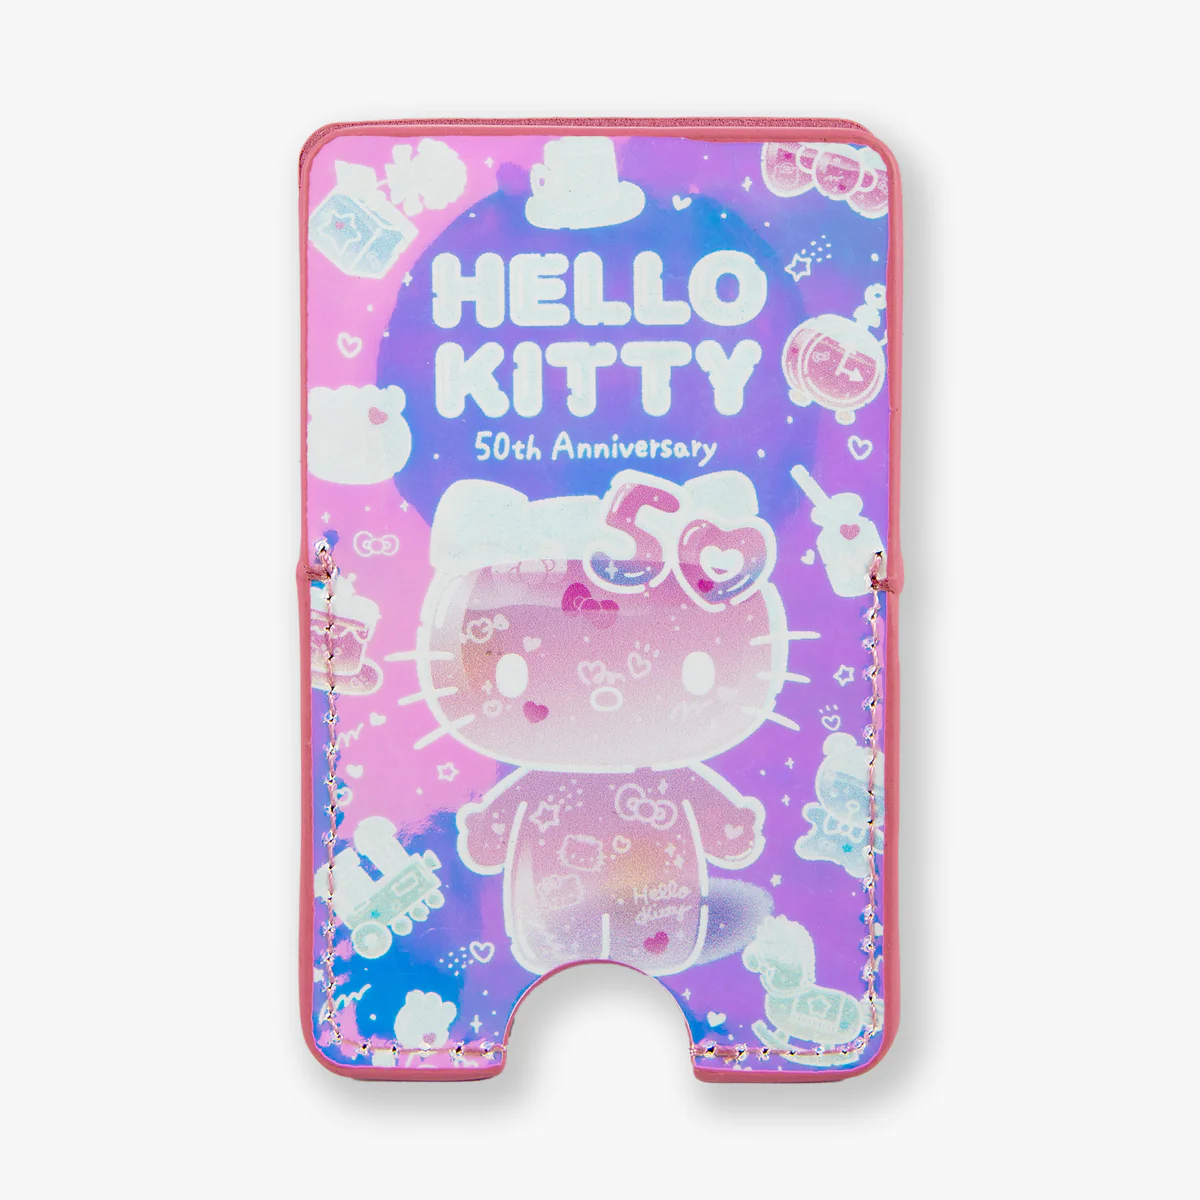 Sonix x Hello Kitty 50th Anniversary Magnetic Wallet